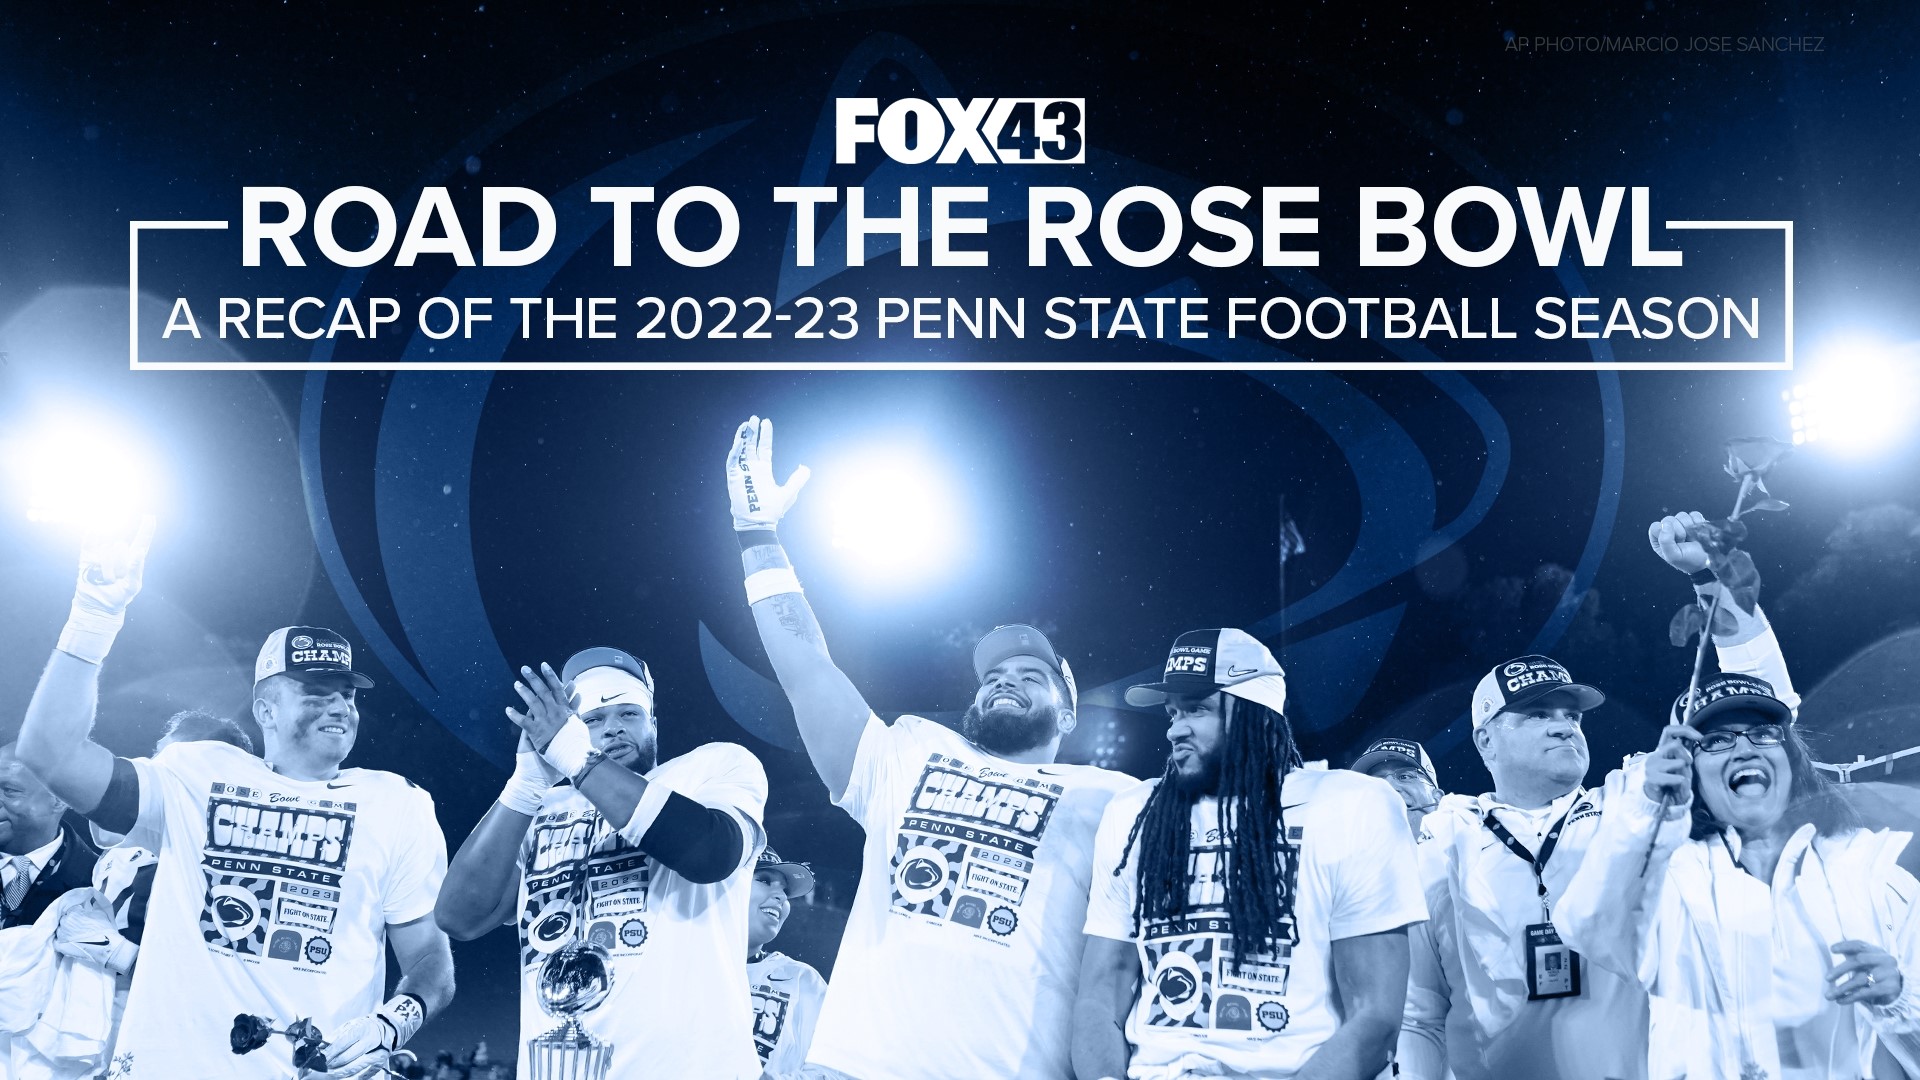 We recapped the 2022-23 Penn State Nittany Lions football team's season and their trip to the Rose Bowl.